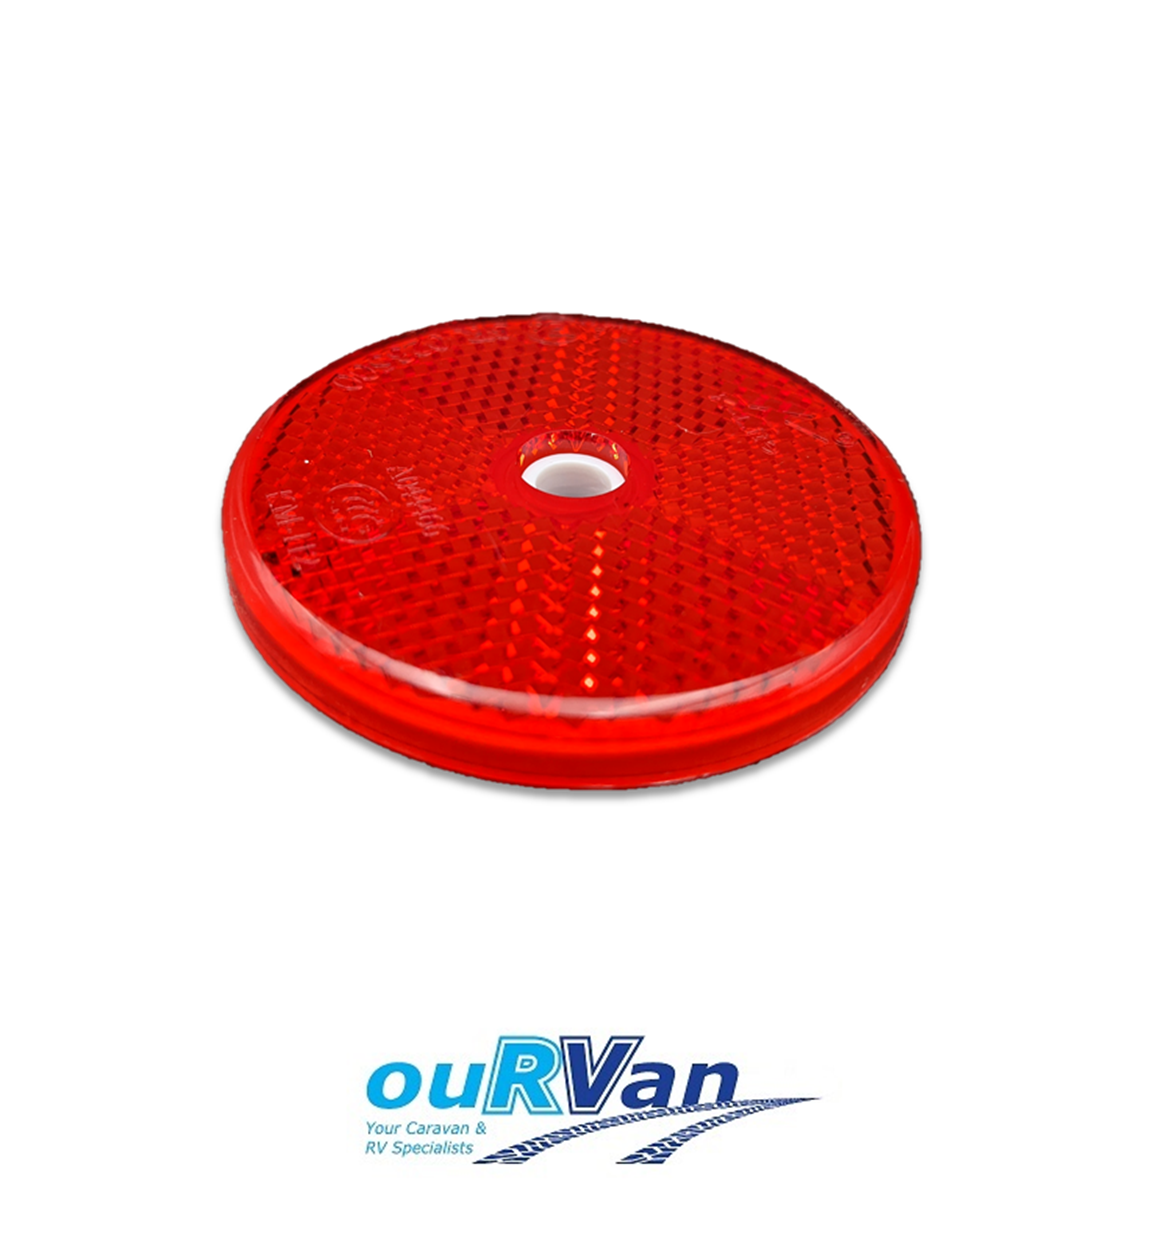 1 x 84012 EQUIVALENT 60mm DIAMETER RED SCREW ON REFLECTOR